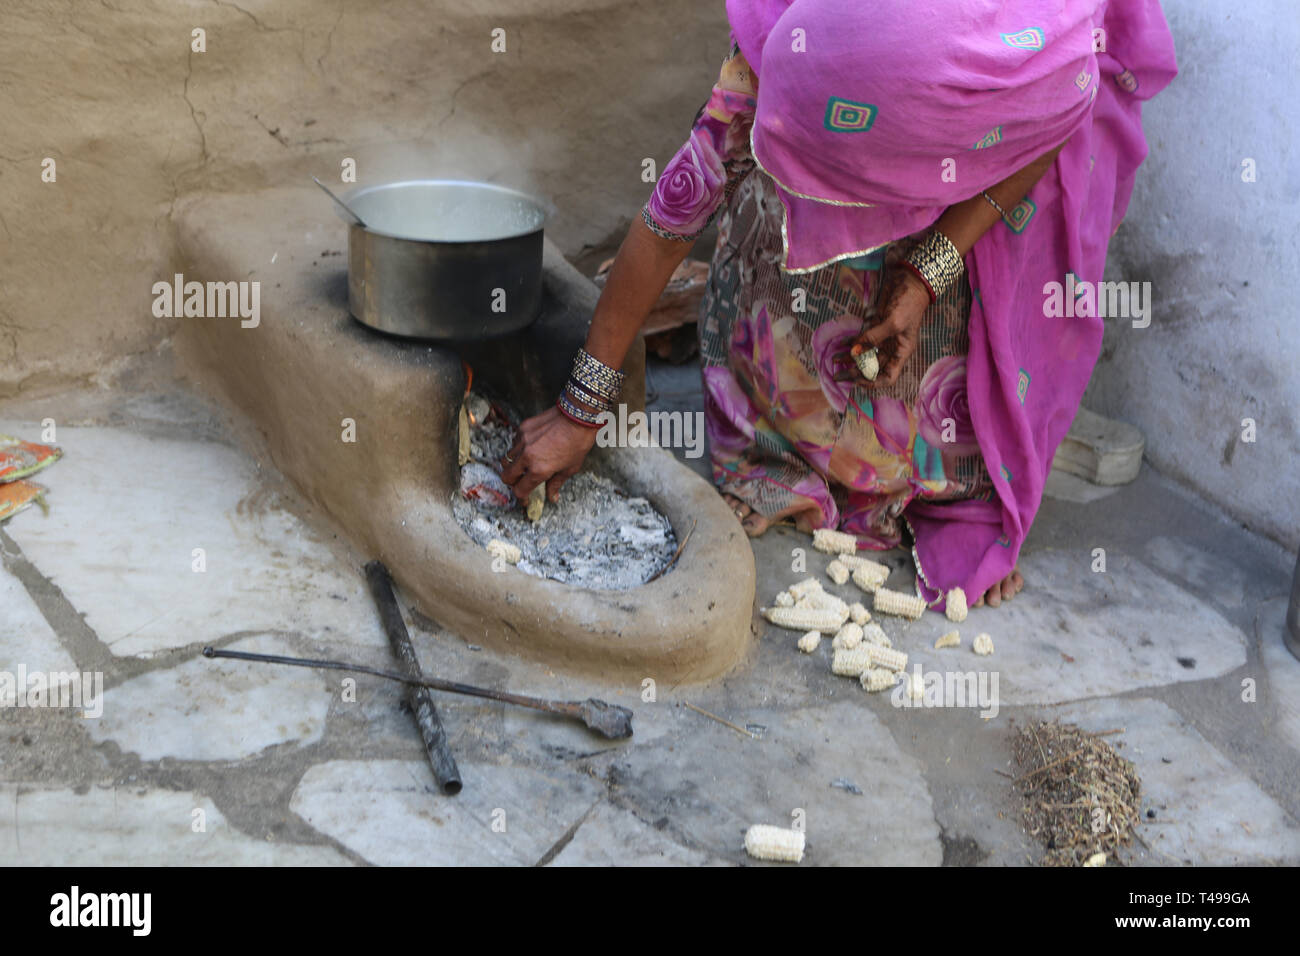 Rajasthani woman cooking indien chapati --- chapatti, pain indien Jodhpur, Rajasthan, Inde, Asie Banque D'Images